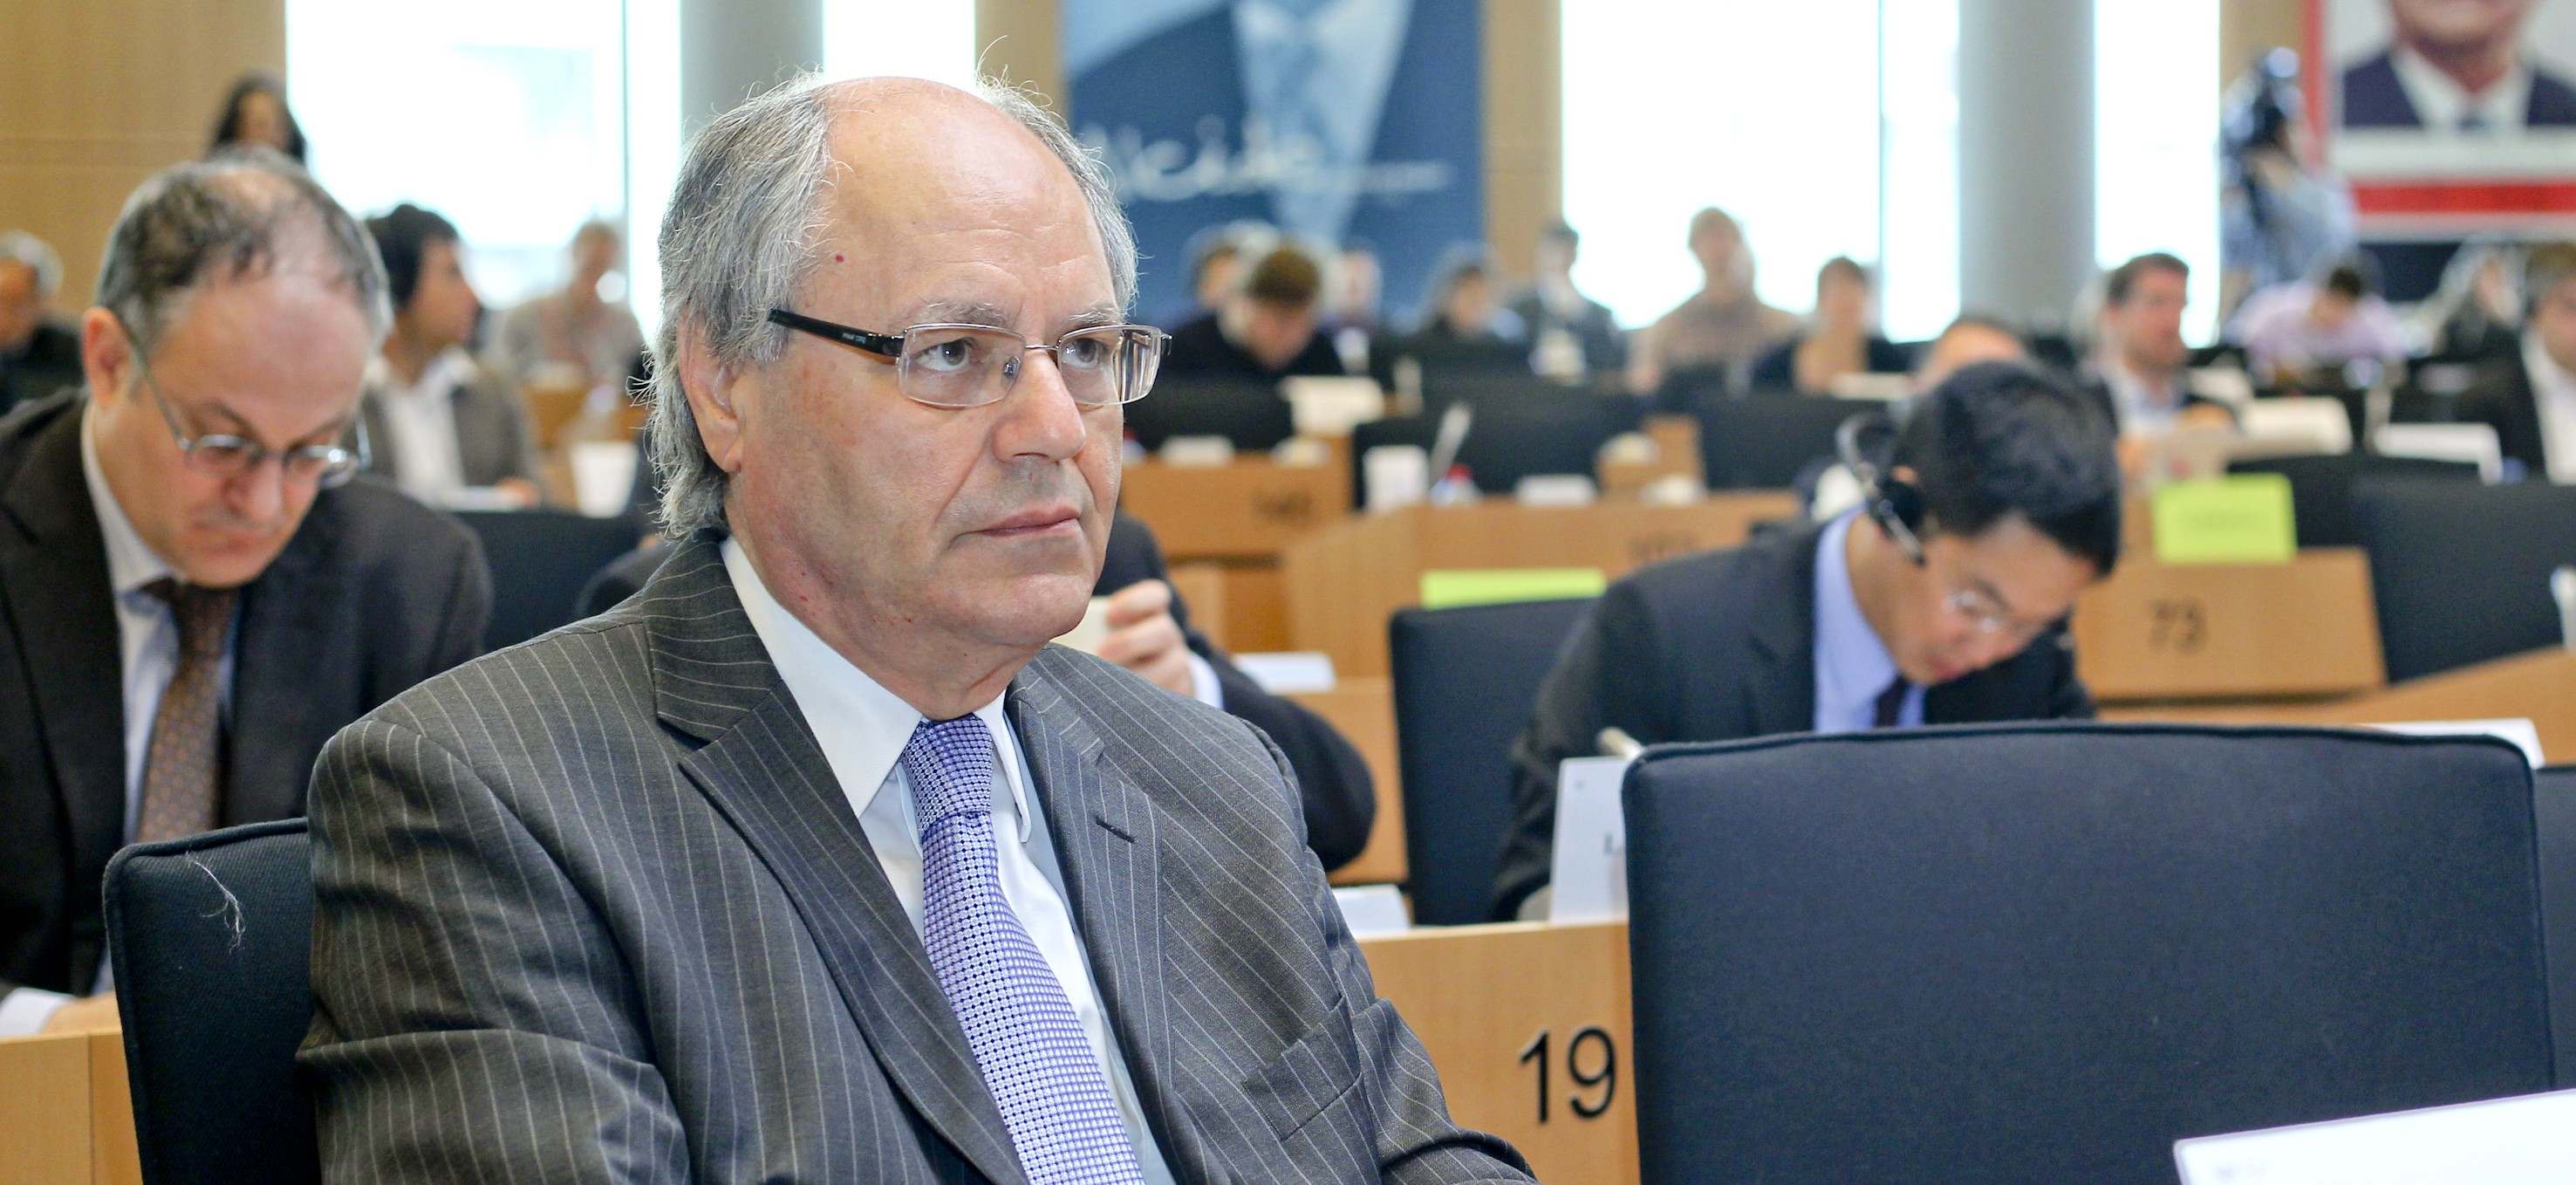 The MEP’s diary: Edward Scicluna